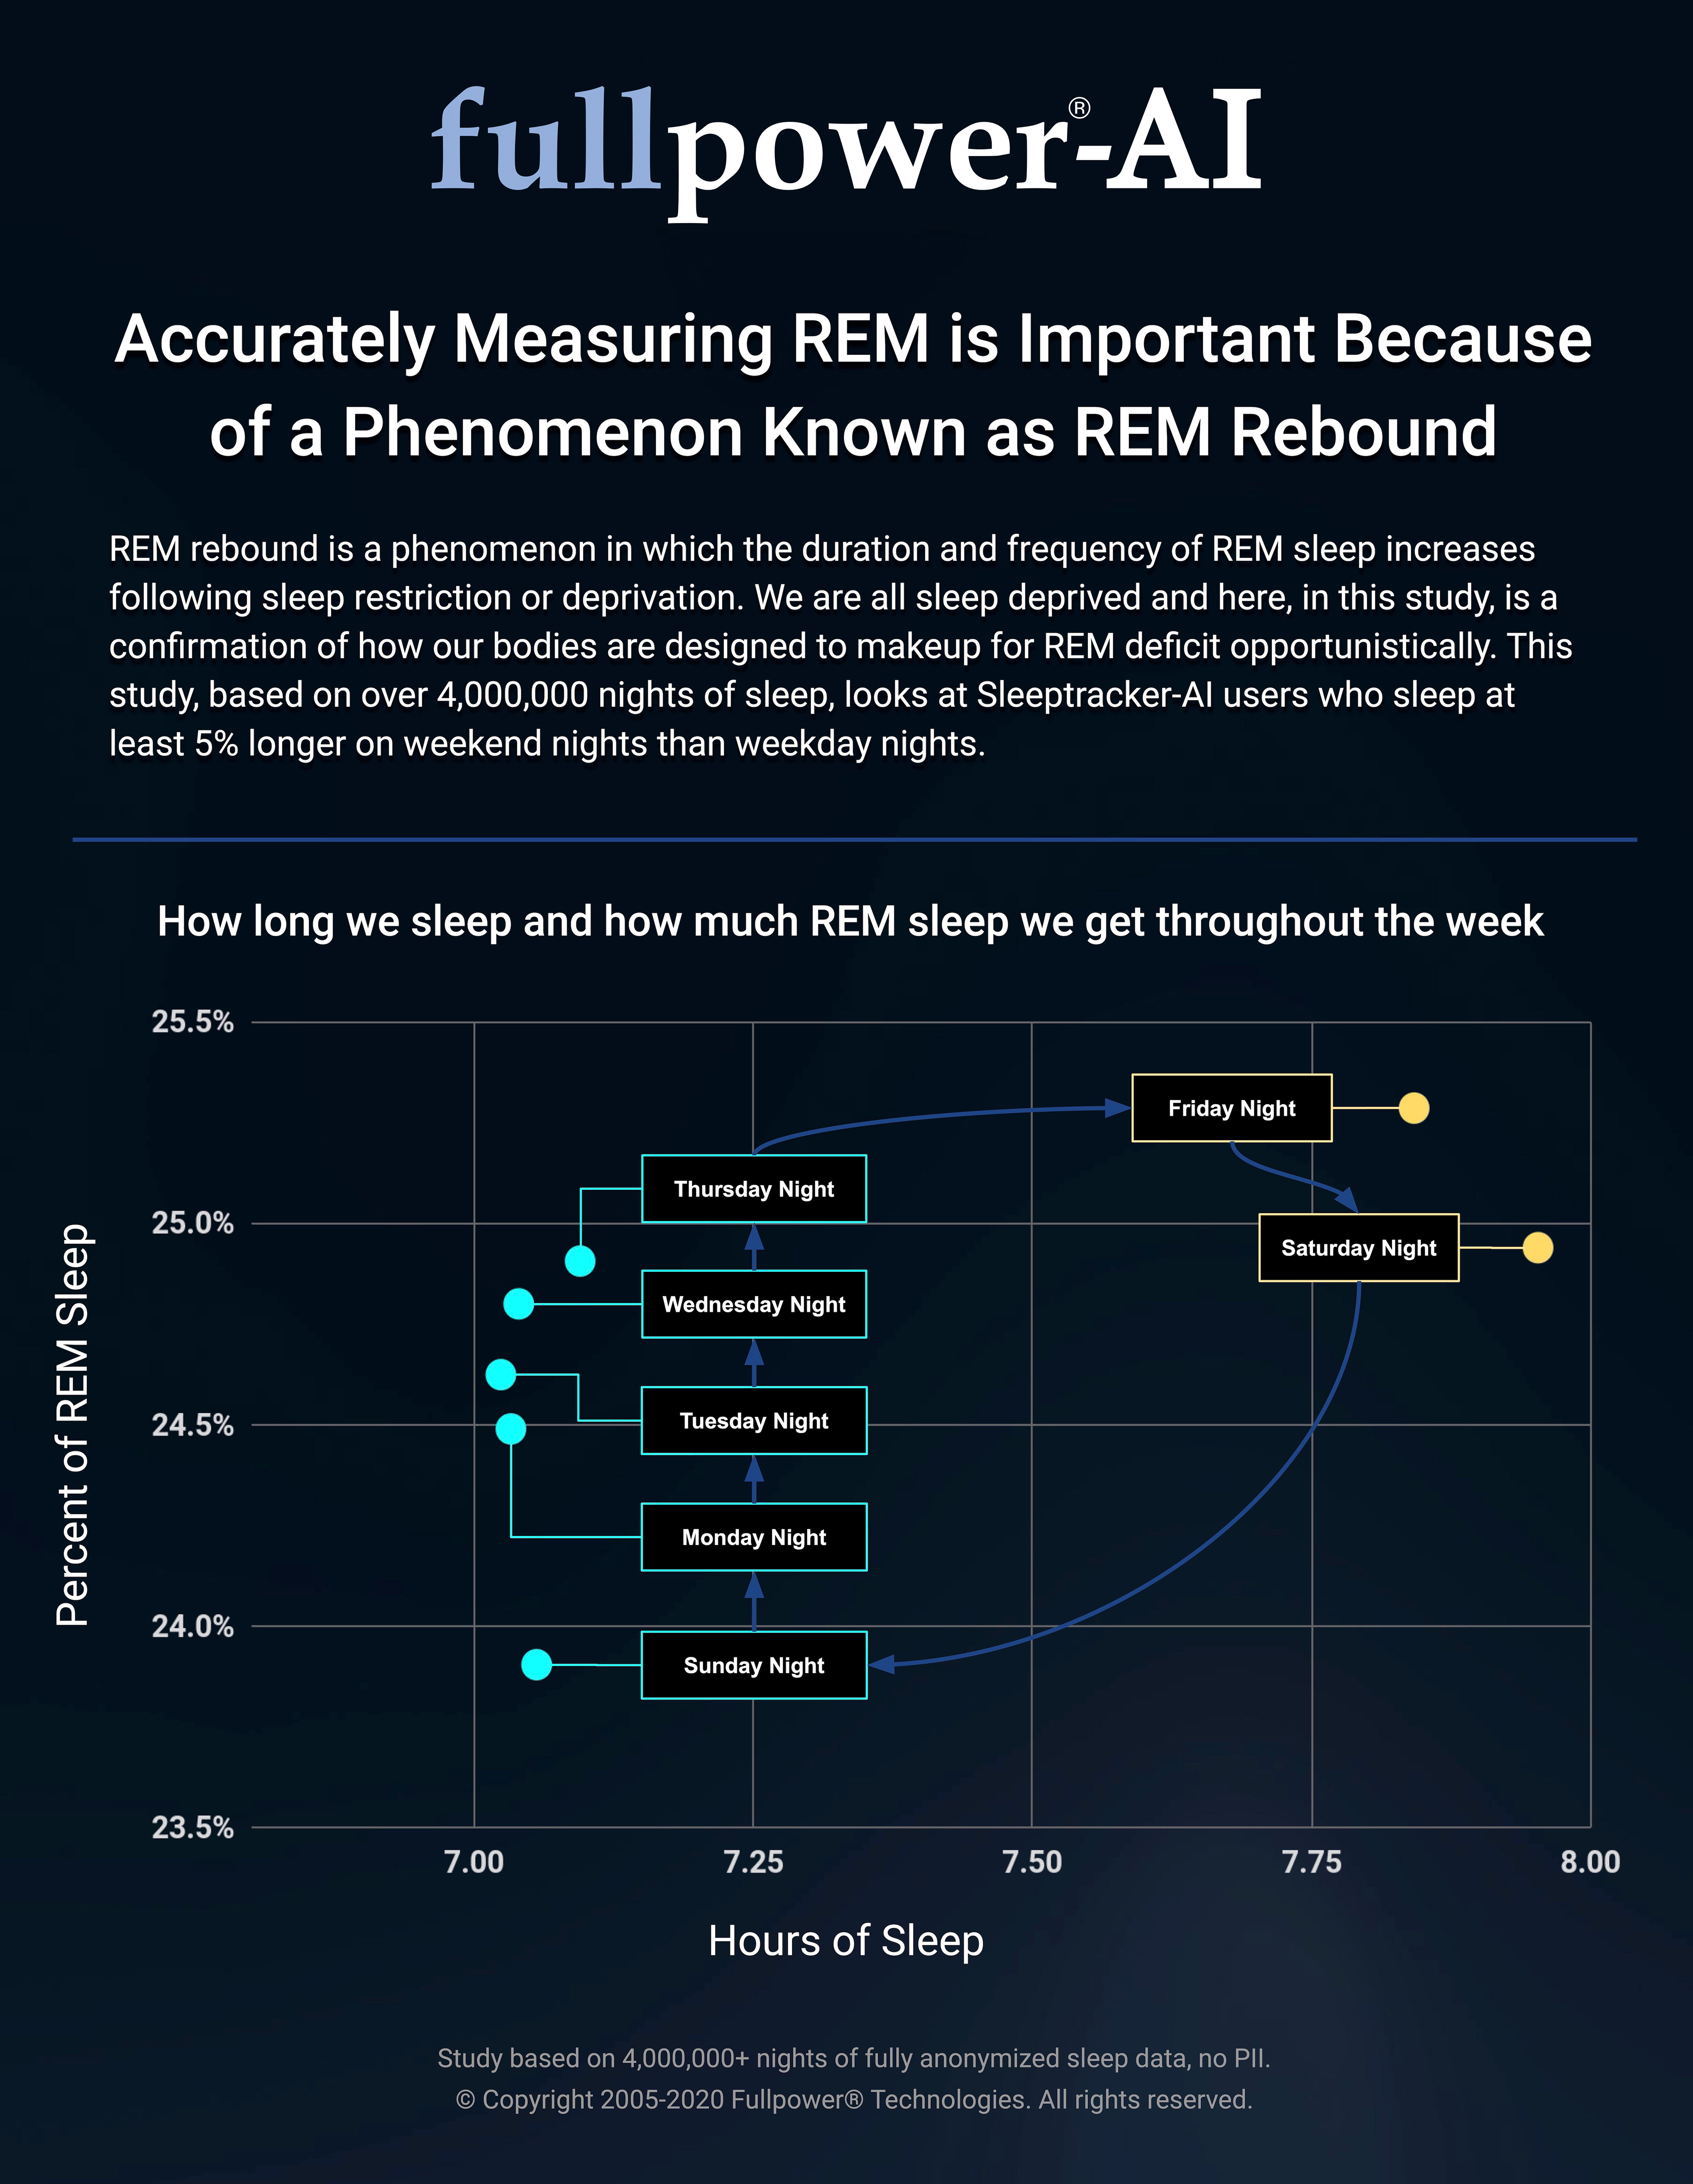 Accurately Measuring REM is Important Because of a Phenomenon Known as REM Rebound